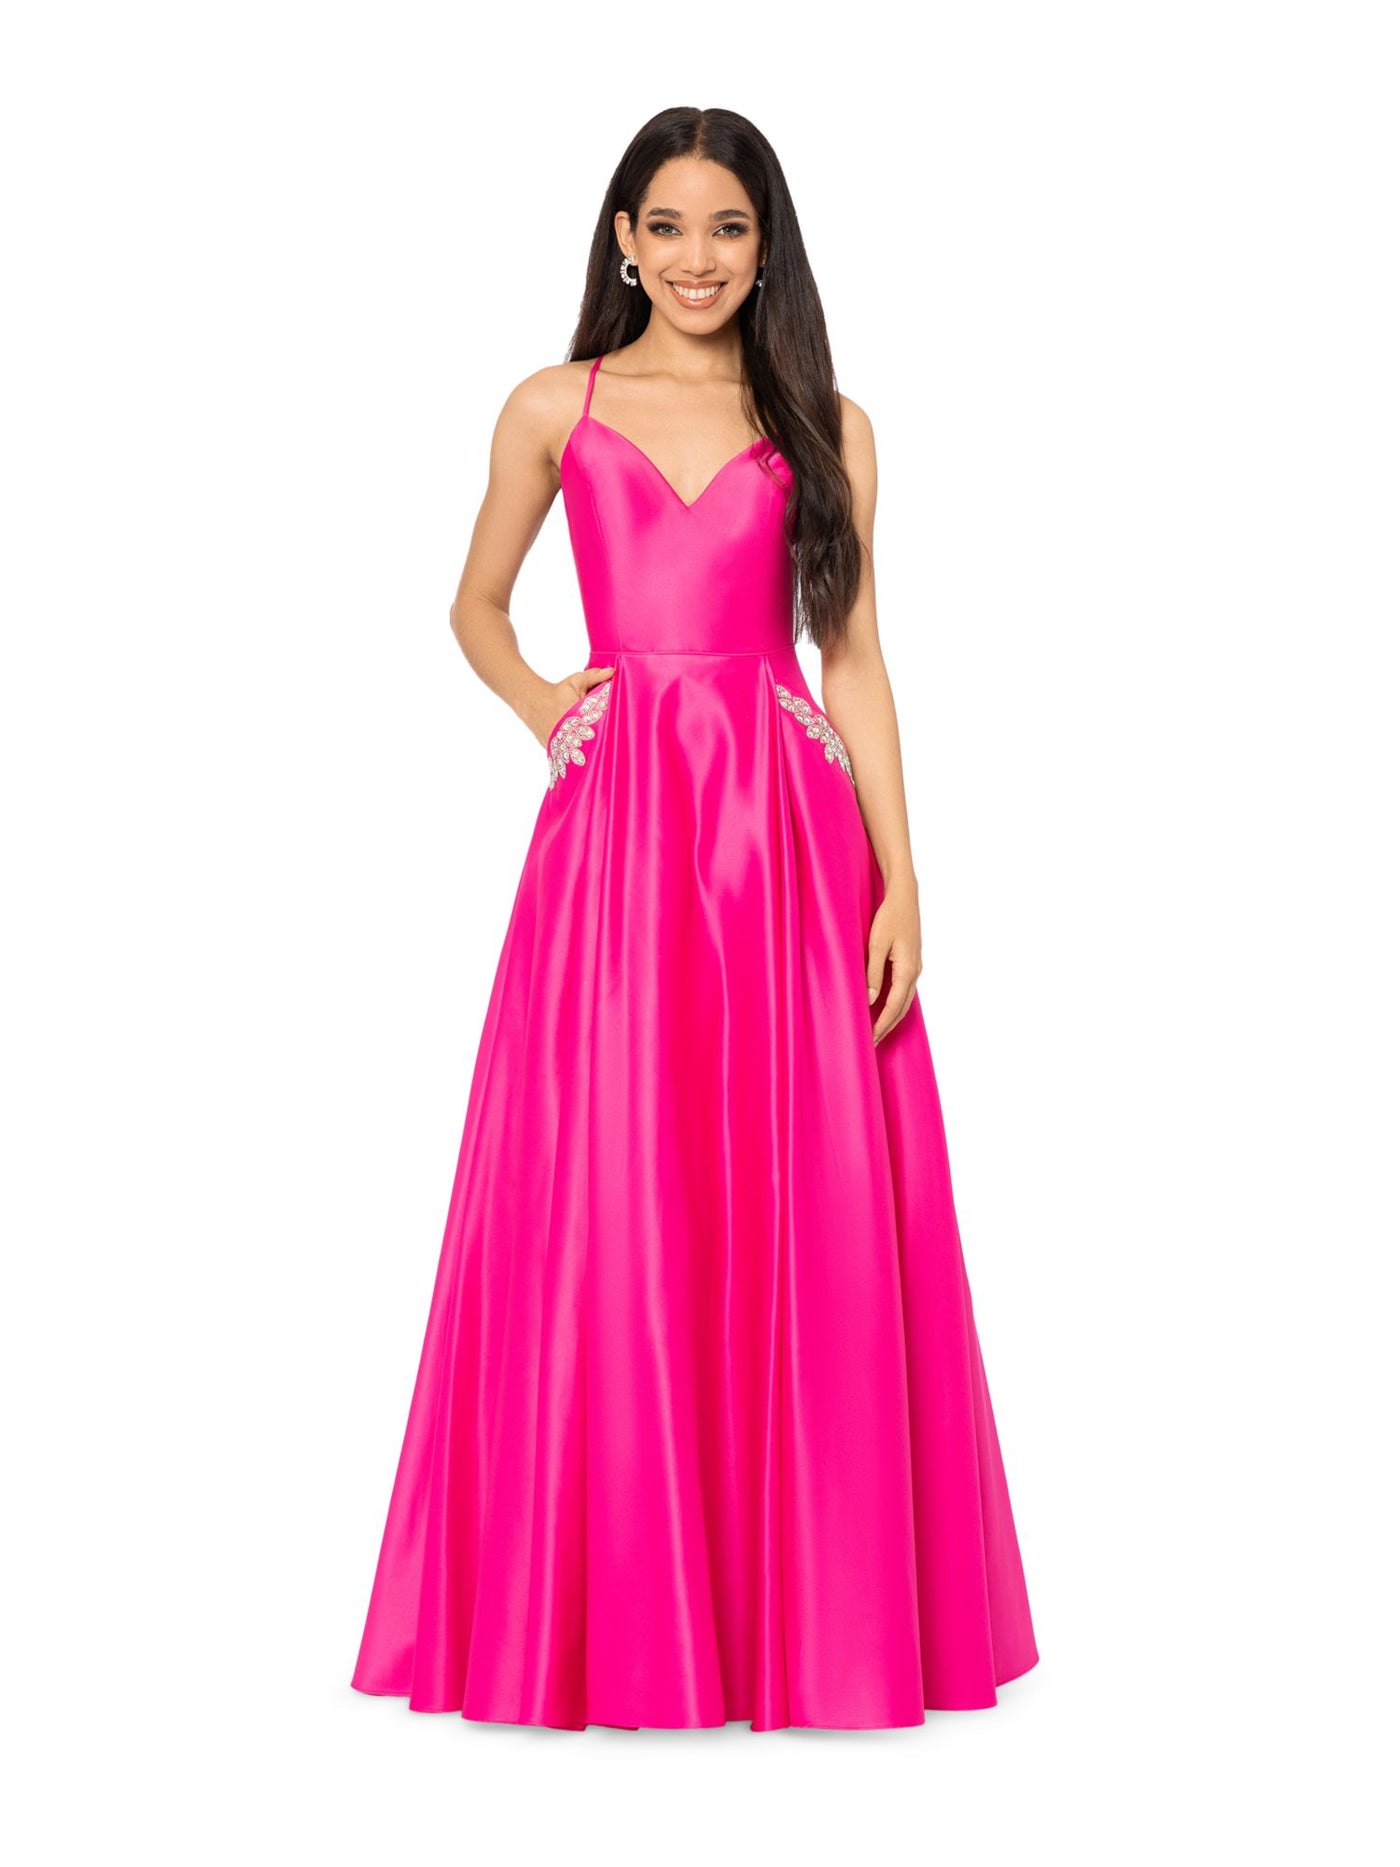 BLONDIE NITES Womens Pink Embellished Zippered Lace Up Back Pocketed Padded Spaghetti Strap Sweetheart Neckline Full-Length Formal Gown Dress Juniors 5